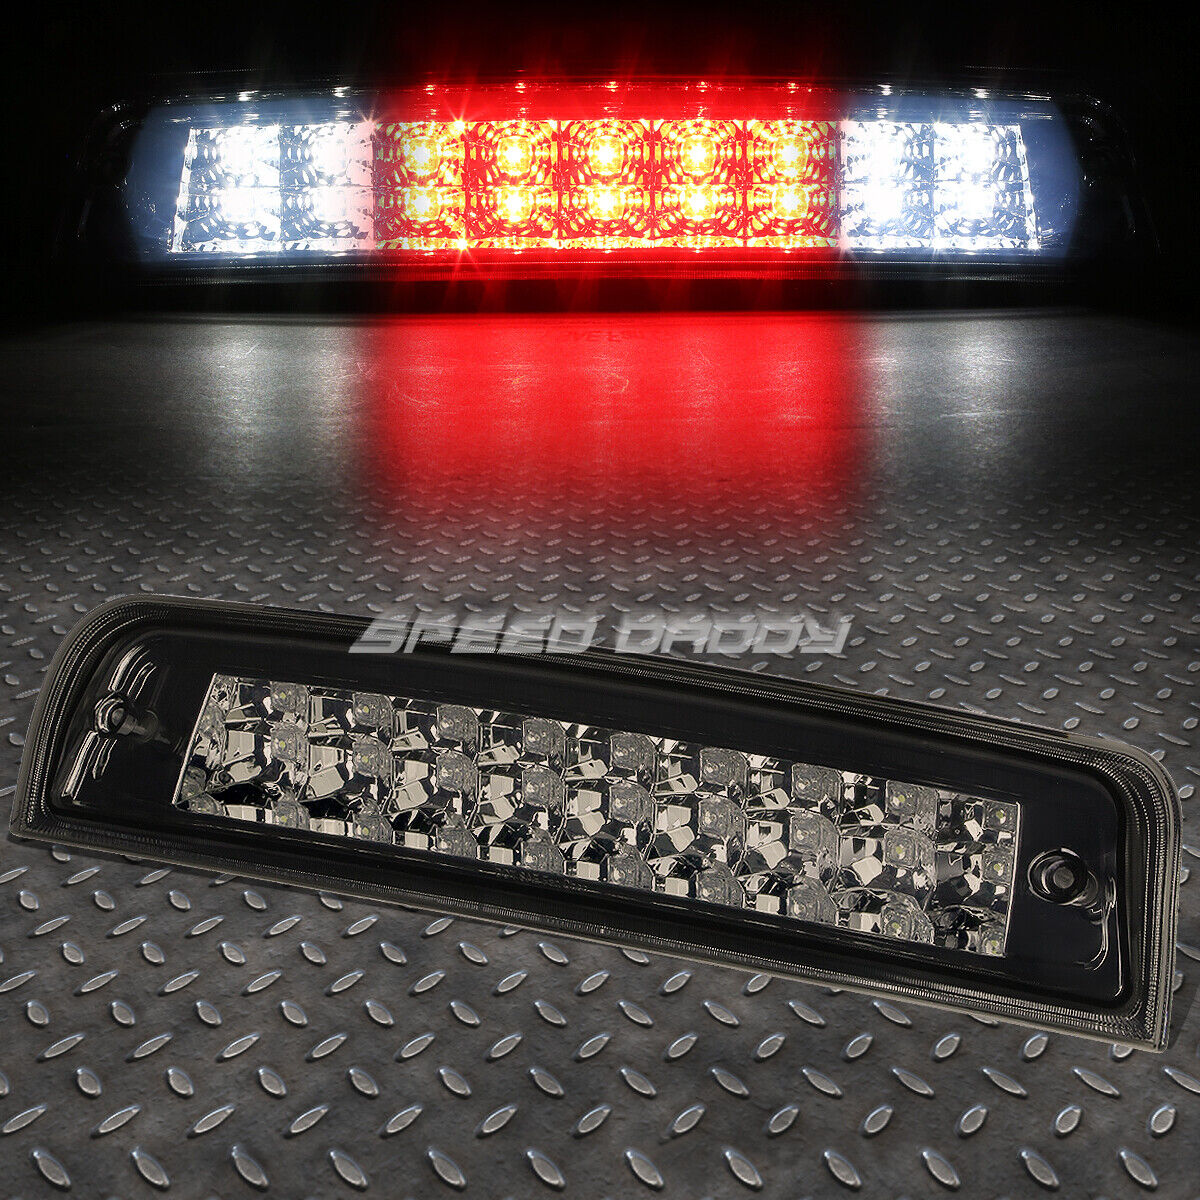 [2-ROW LED]FOR 09-17 RAM TRUCK THIRD 3RD TAIL BRAKE LIGHT STOP CARGO LAMP SMOKED